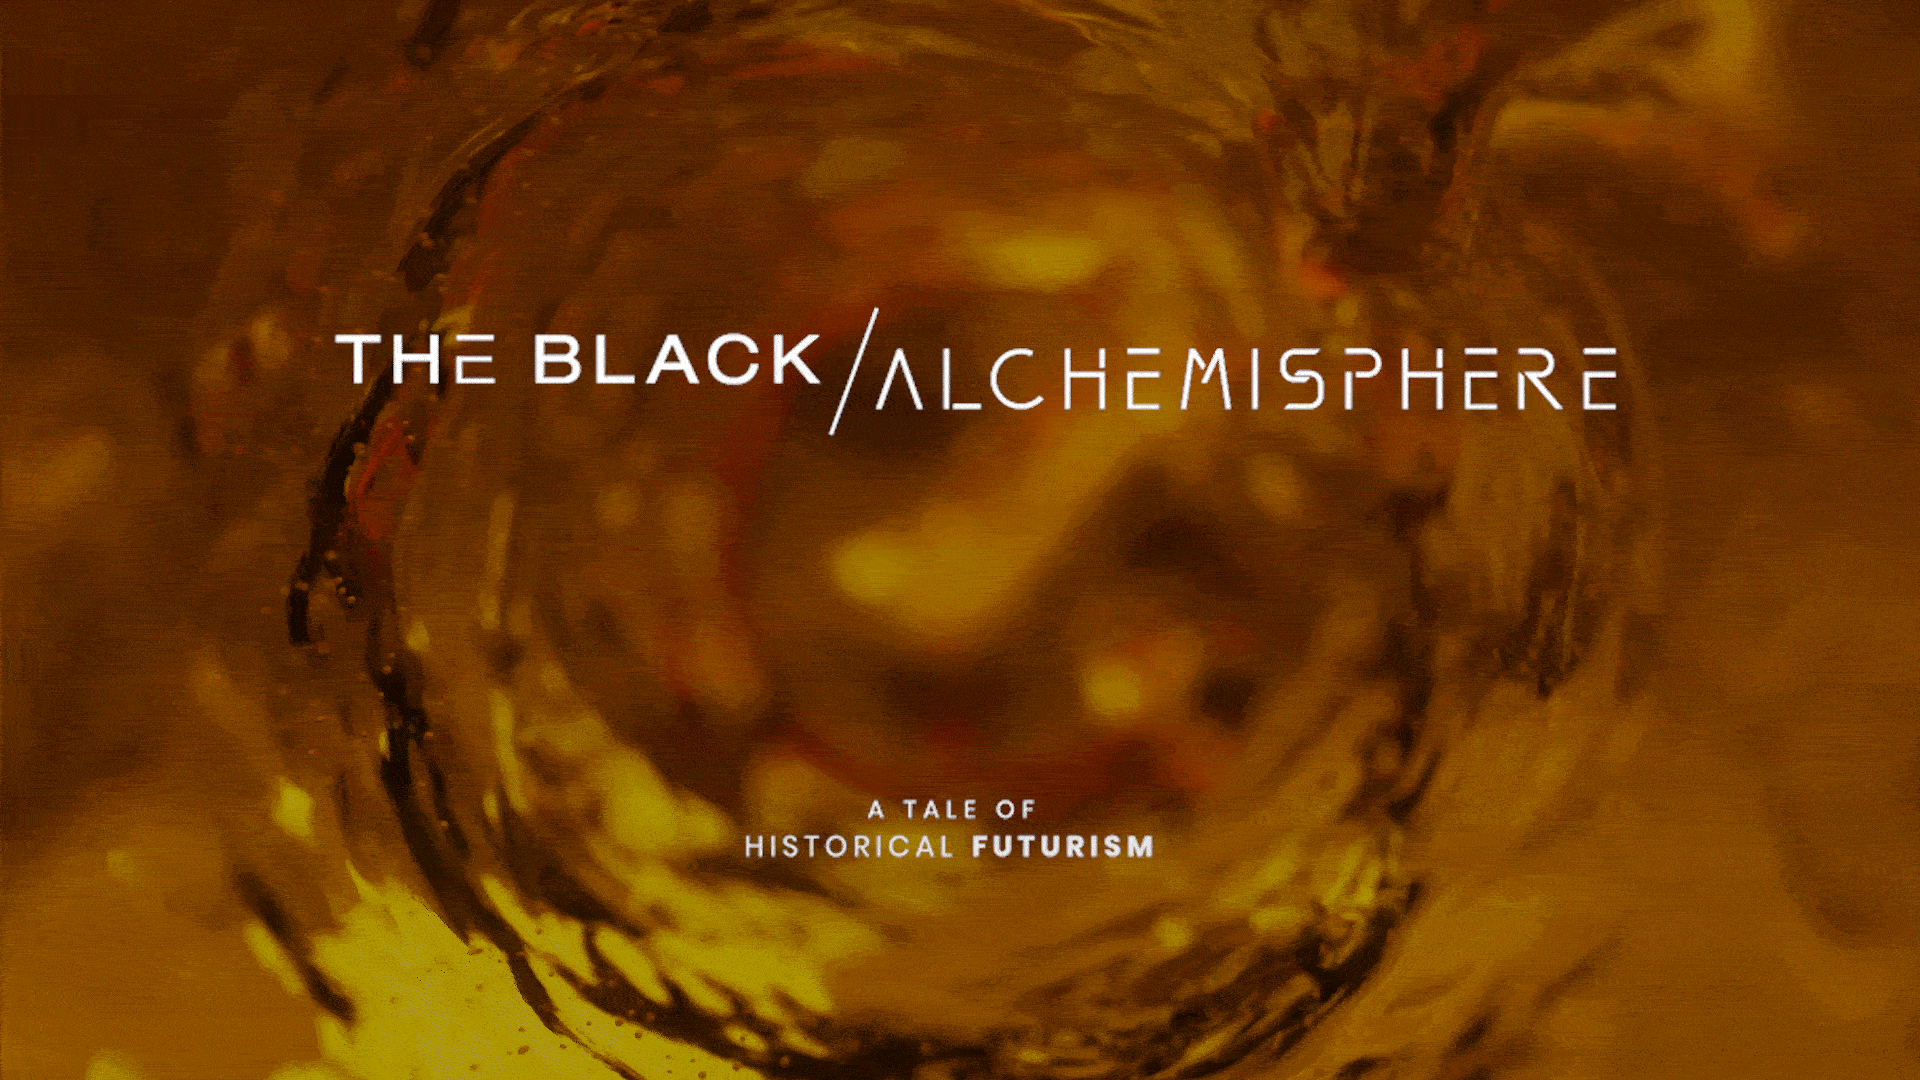 gif of a portal with logo reading "the black alchemisphere: A tale of historical futurism"